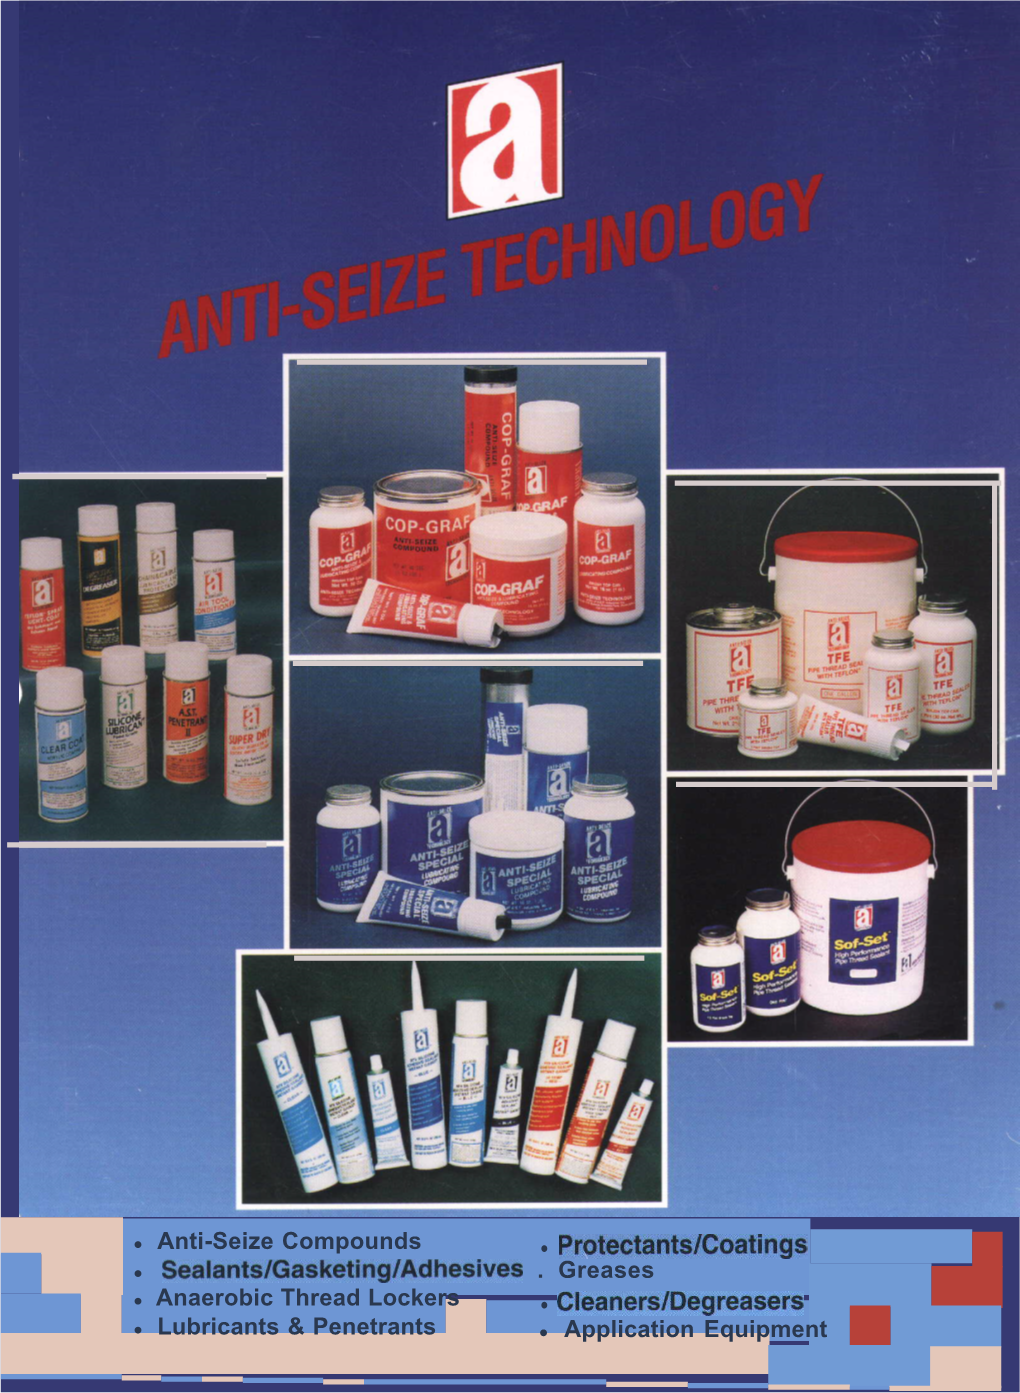 Anti-Seize Compounds L Protectantslcoatings L Seaiants/Gasketing/Adhesives